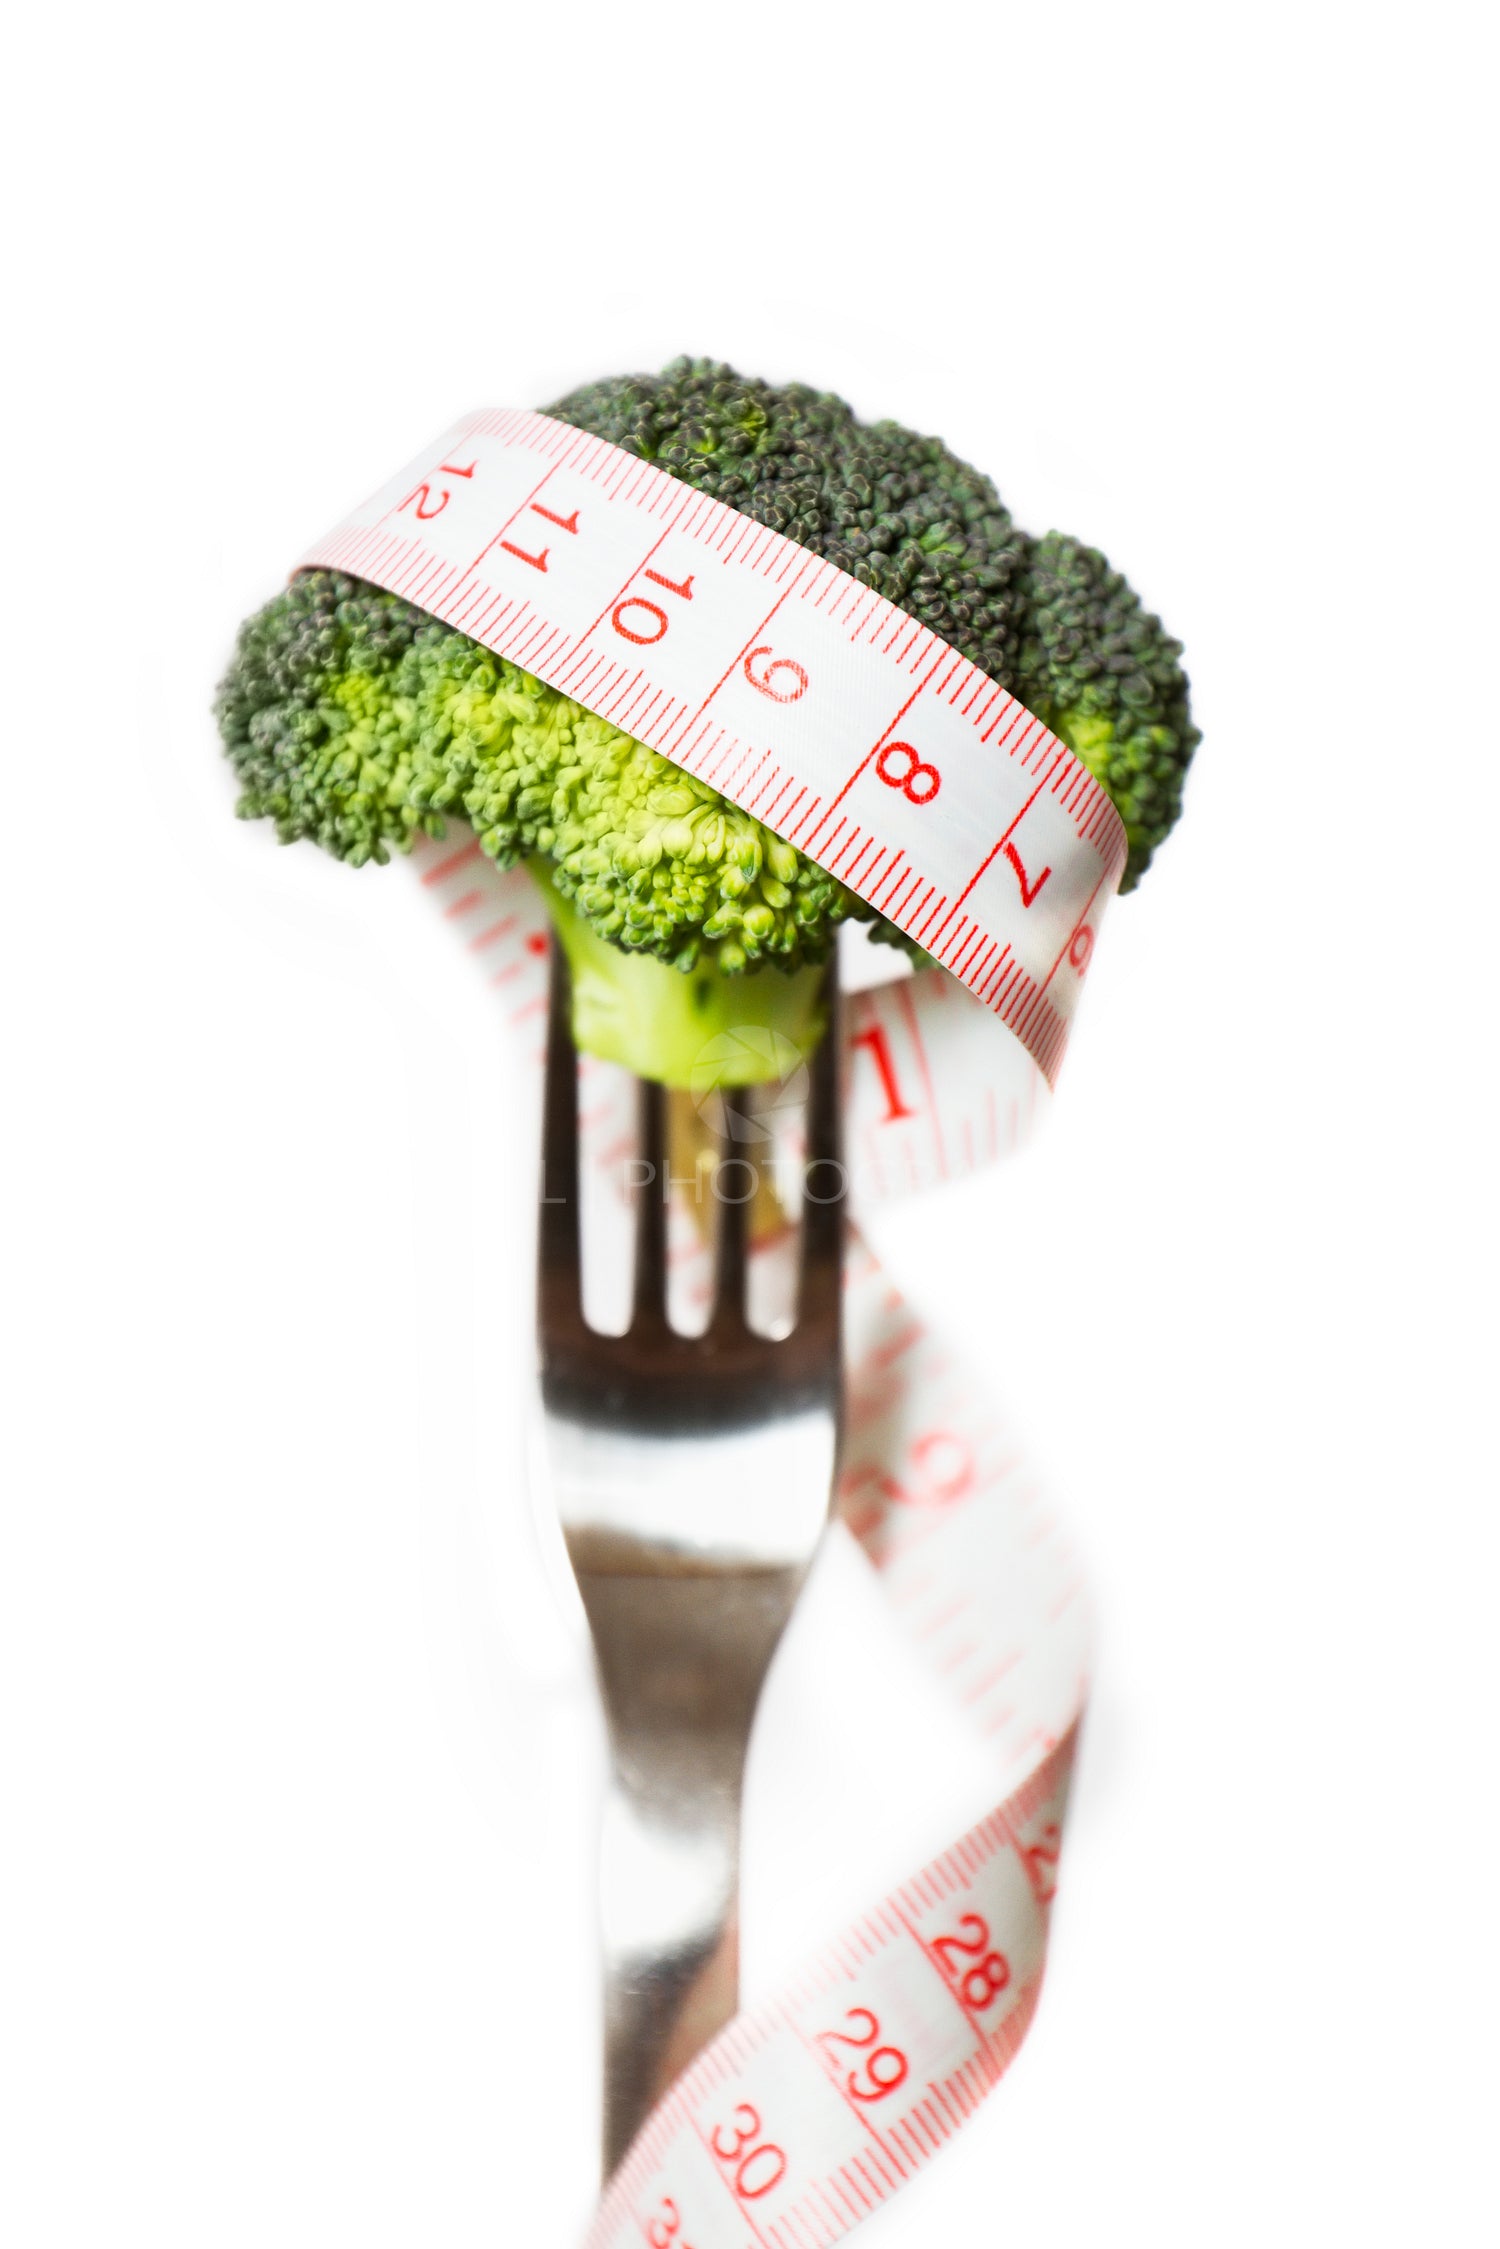 Broccoli with a Tape Measure